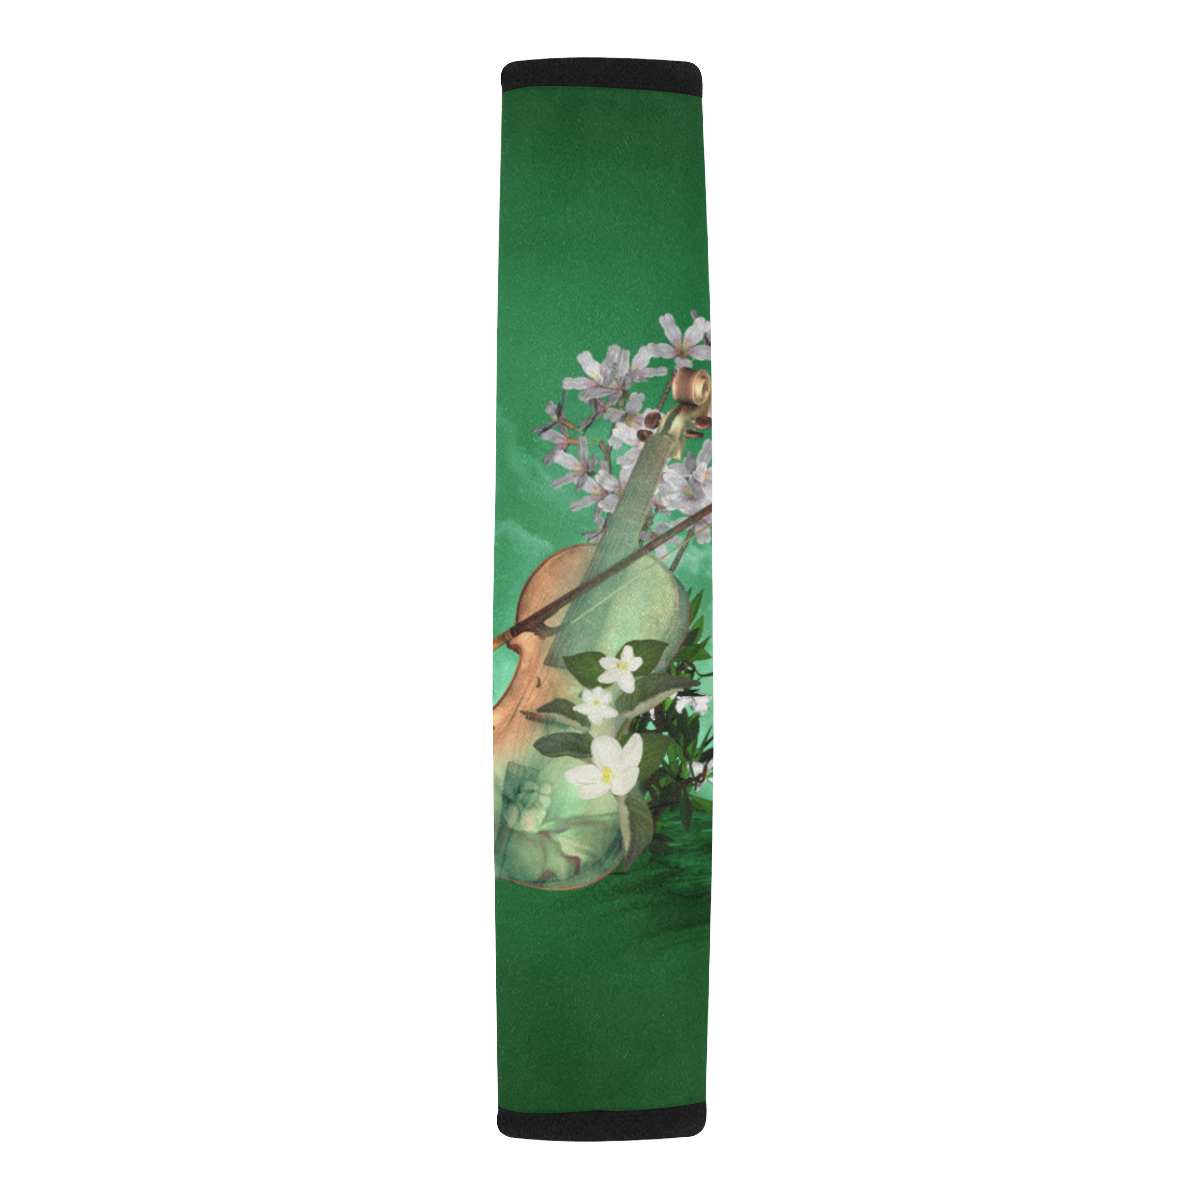 Violin with flowers Car Seat Belt Cover 7''x12.6''